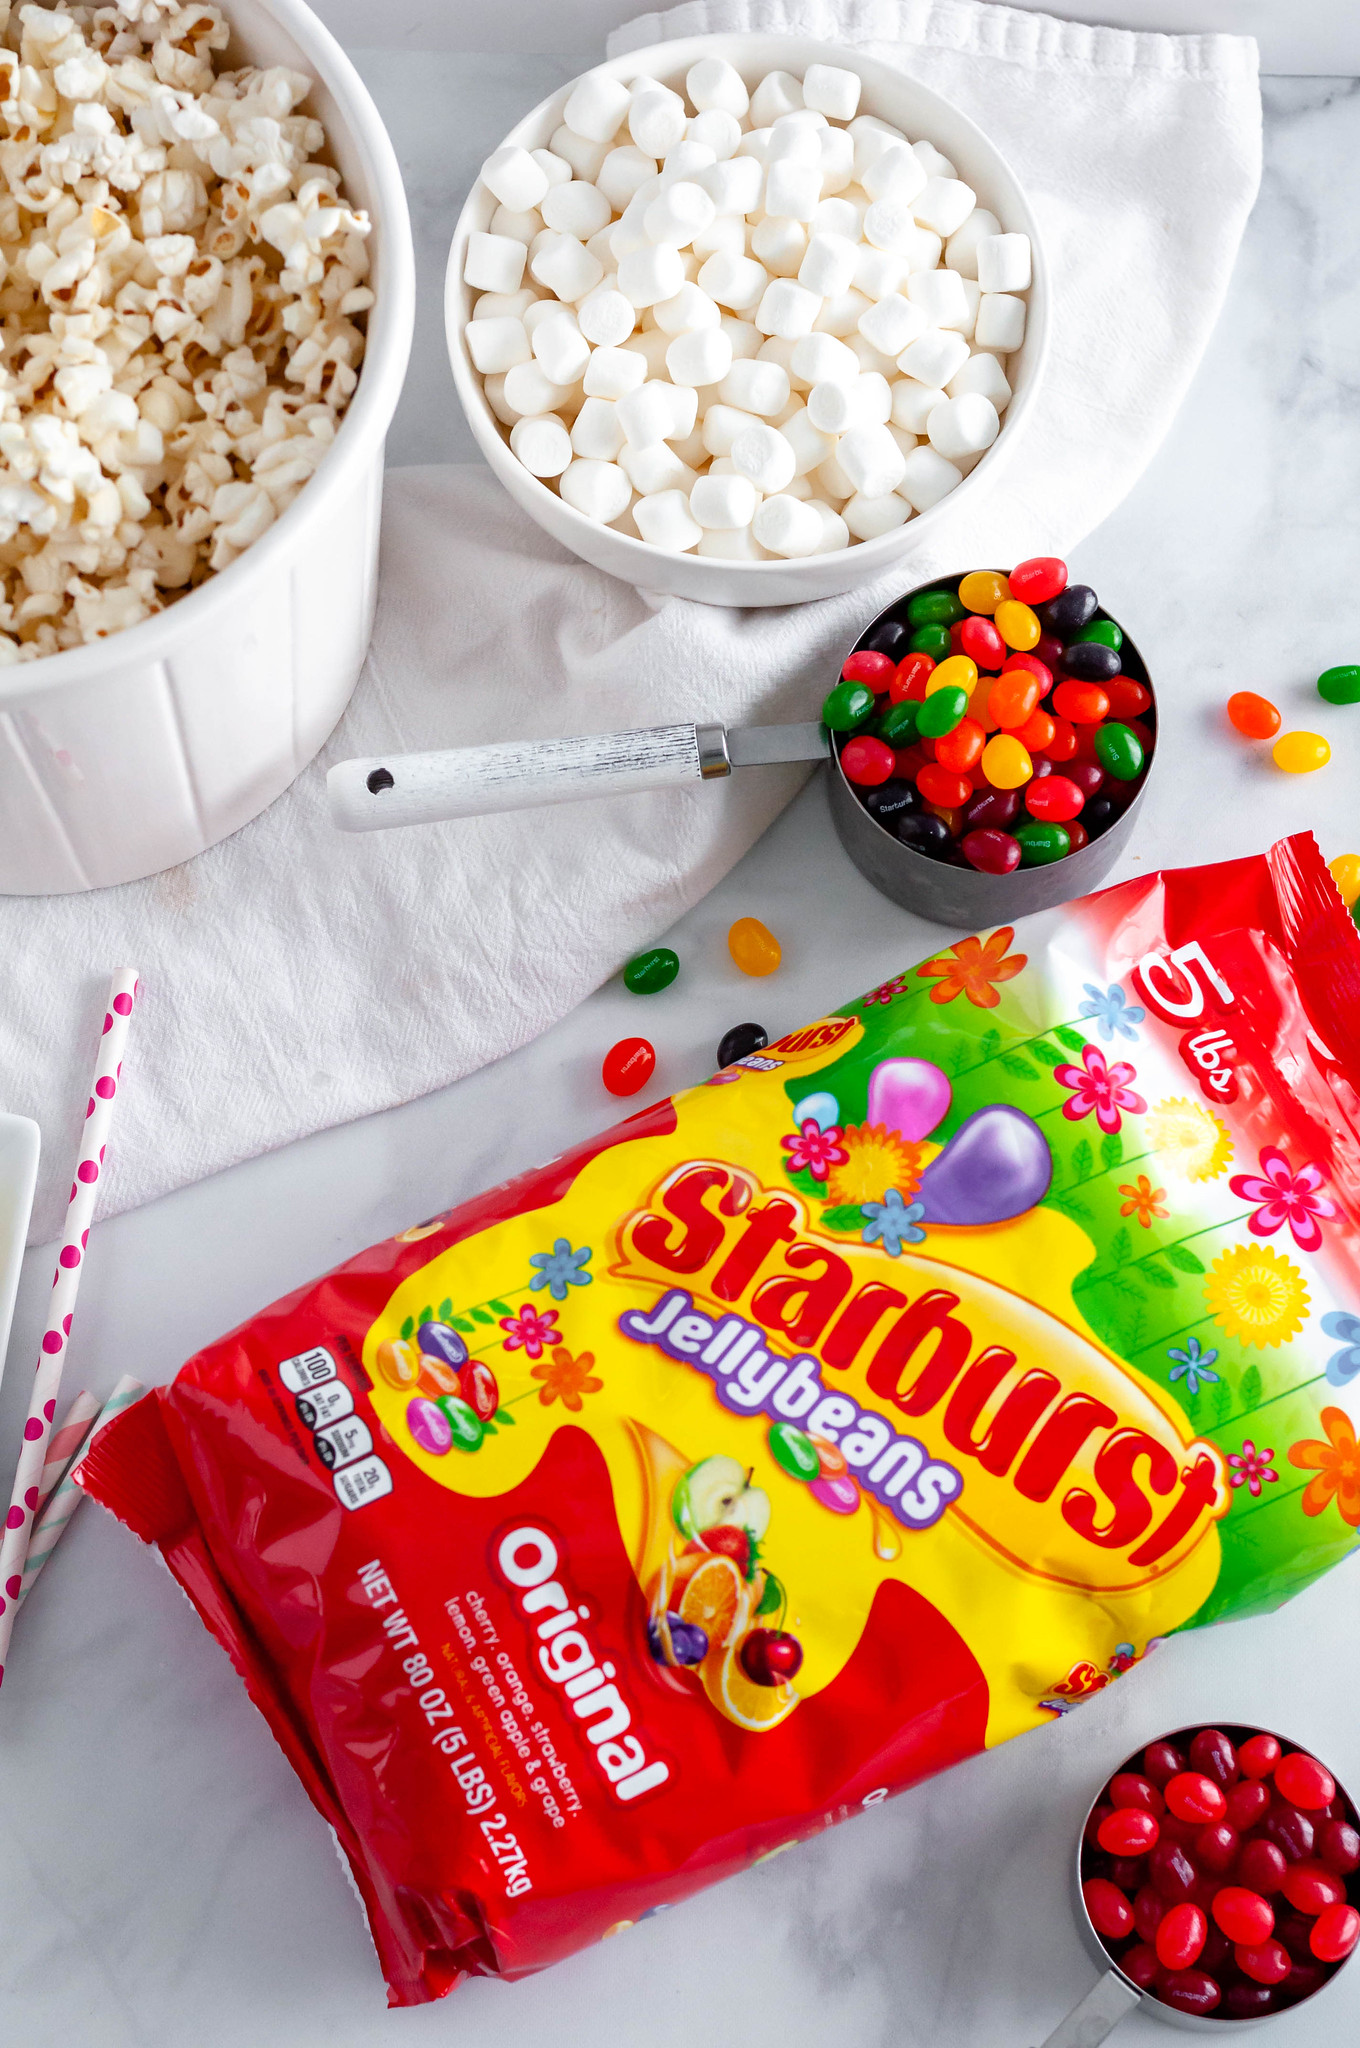 STARBURST® Jellybeans Popcorn Balls are the perfect treat for your Easter baskets. Grab a bag at a great value from Sams Club to make this fun dessert.